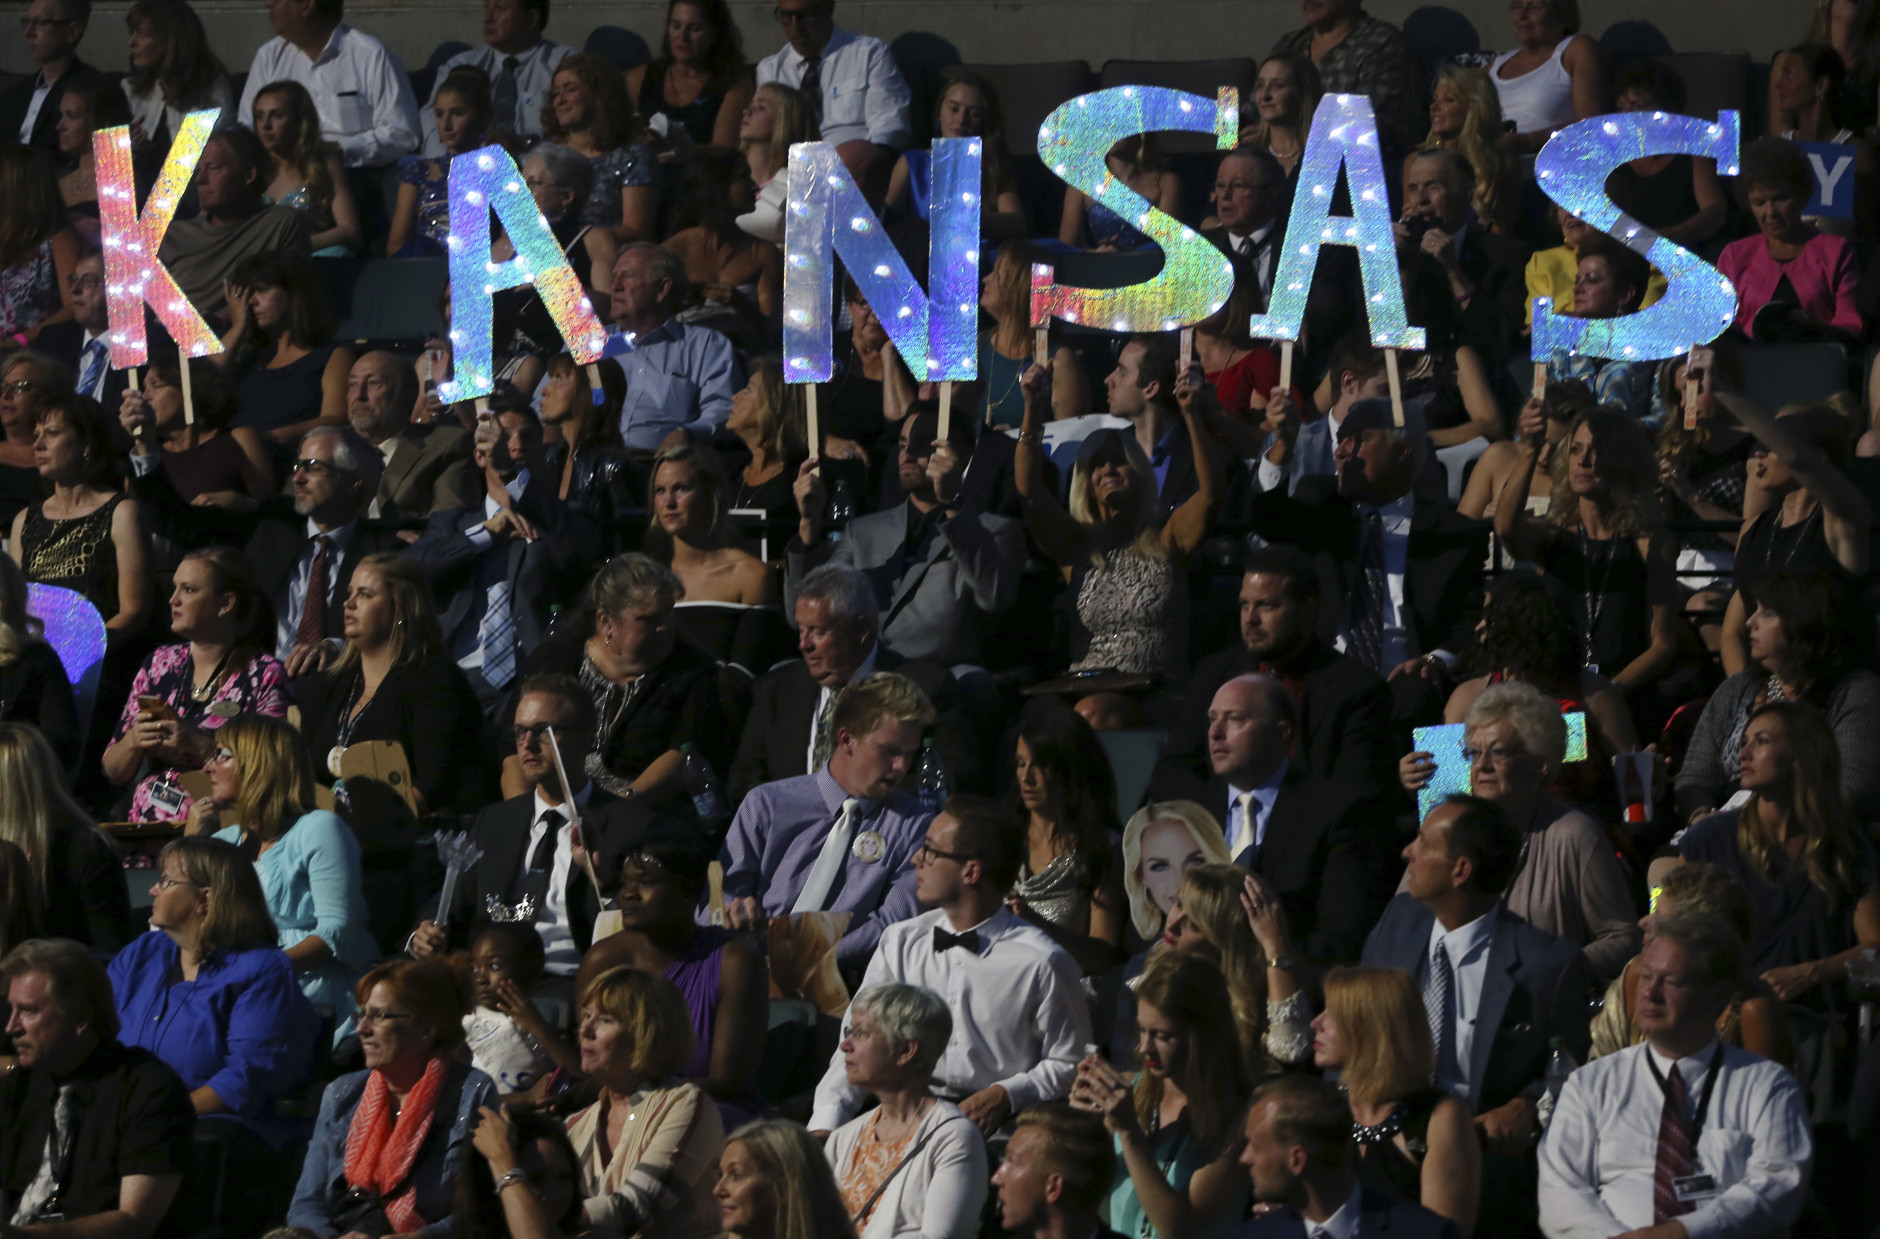 Fans of Miss Kansas Kendall Schoenekase, hold up a sign during the Miss America 2017 pageant, Sunday, Sept. 11, 2016, in Atlantic City, N.J. (AP Photo/Mel Evans)